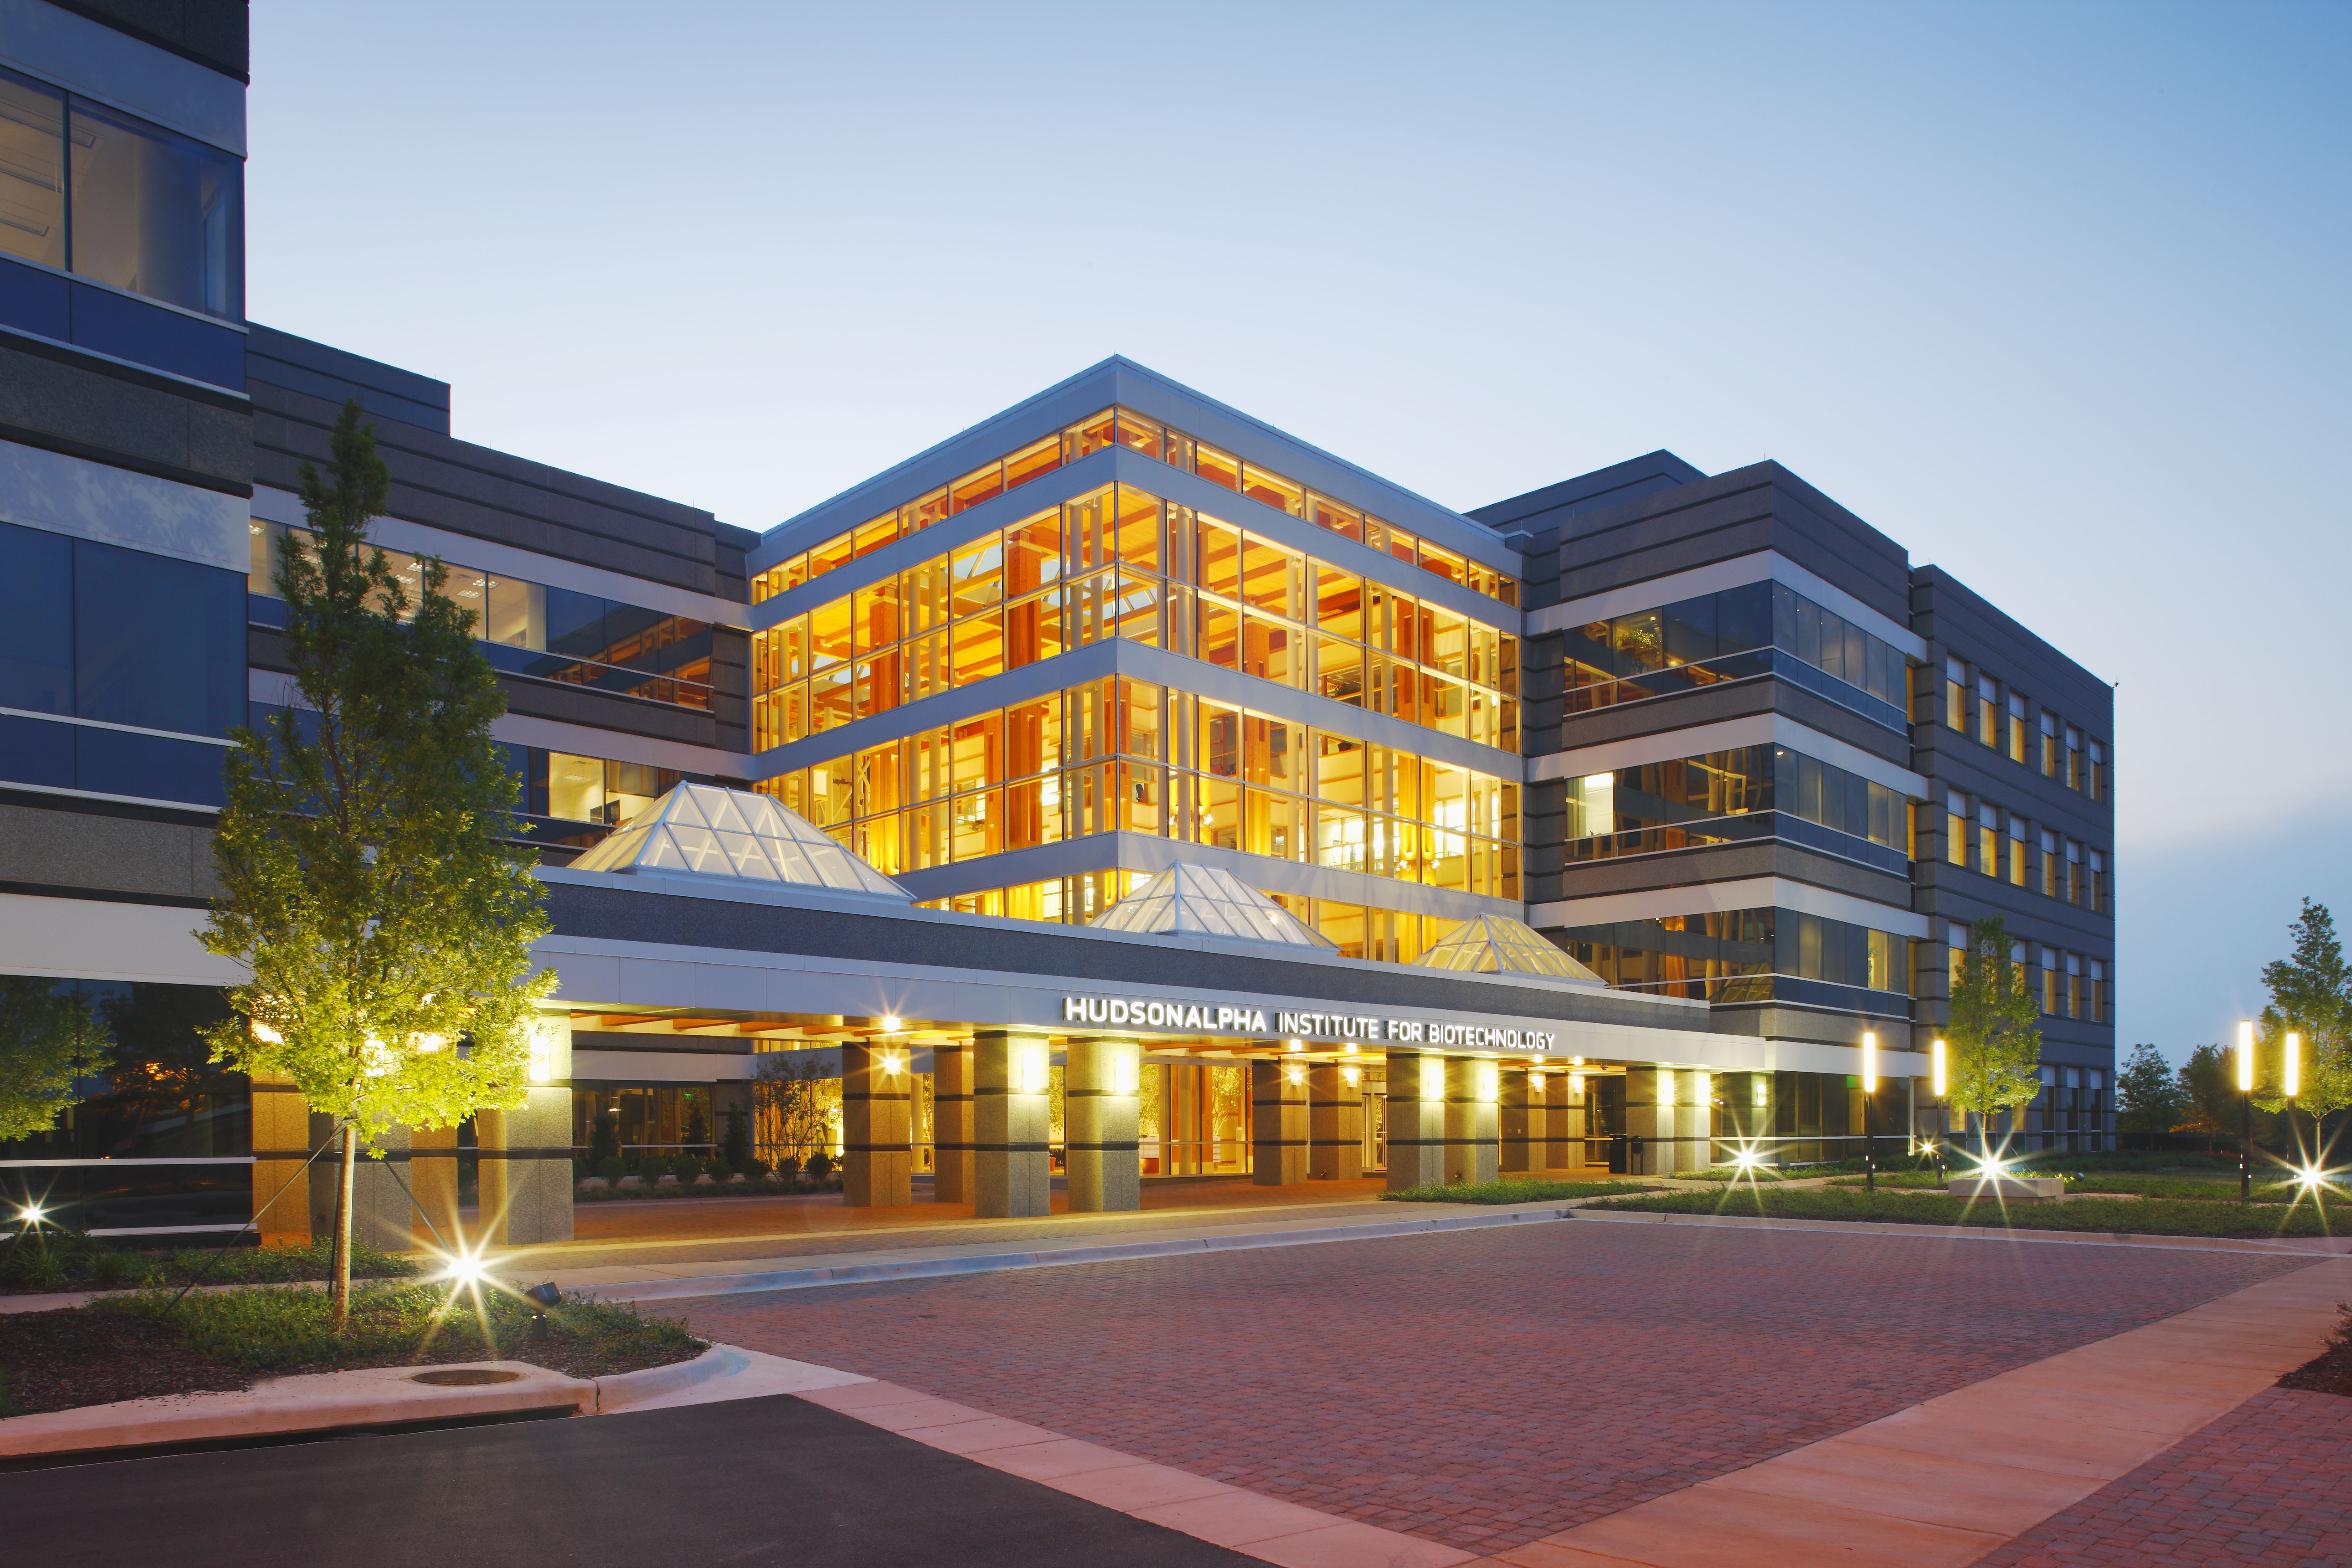 View of the front of the HudsonAlpha Institute for Biotechnology